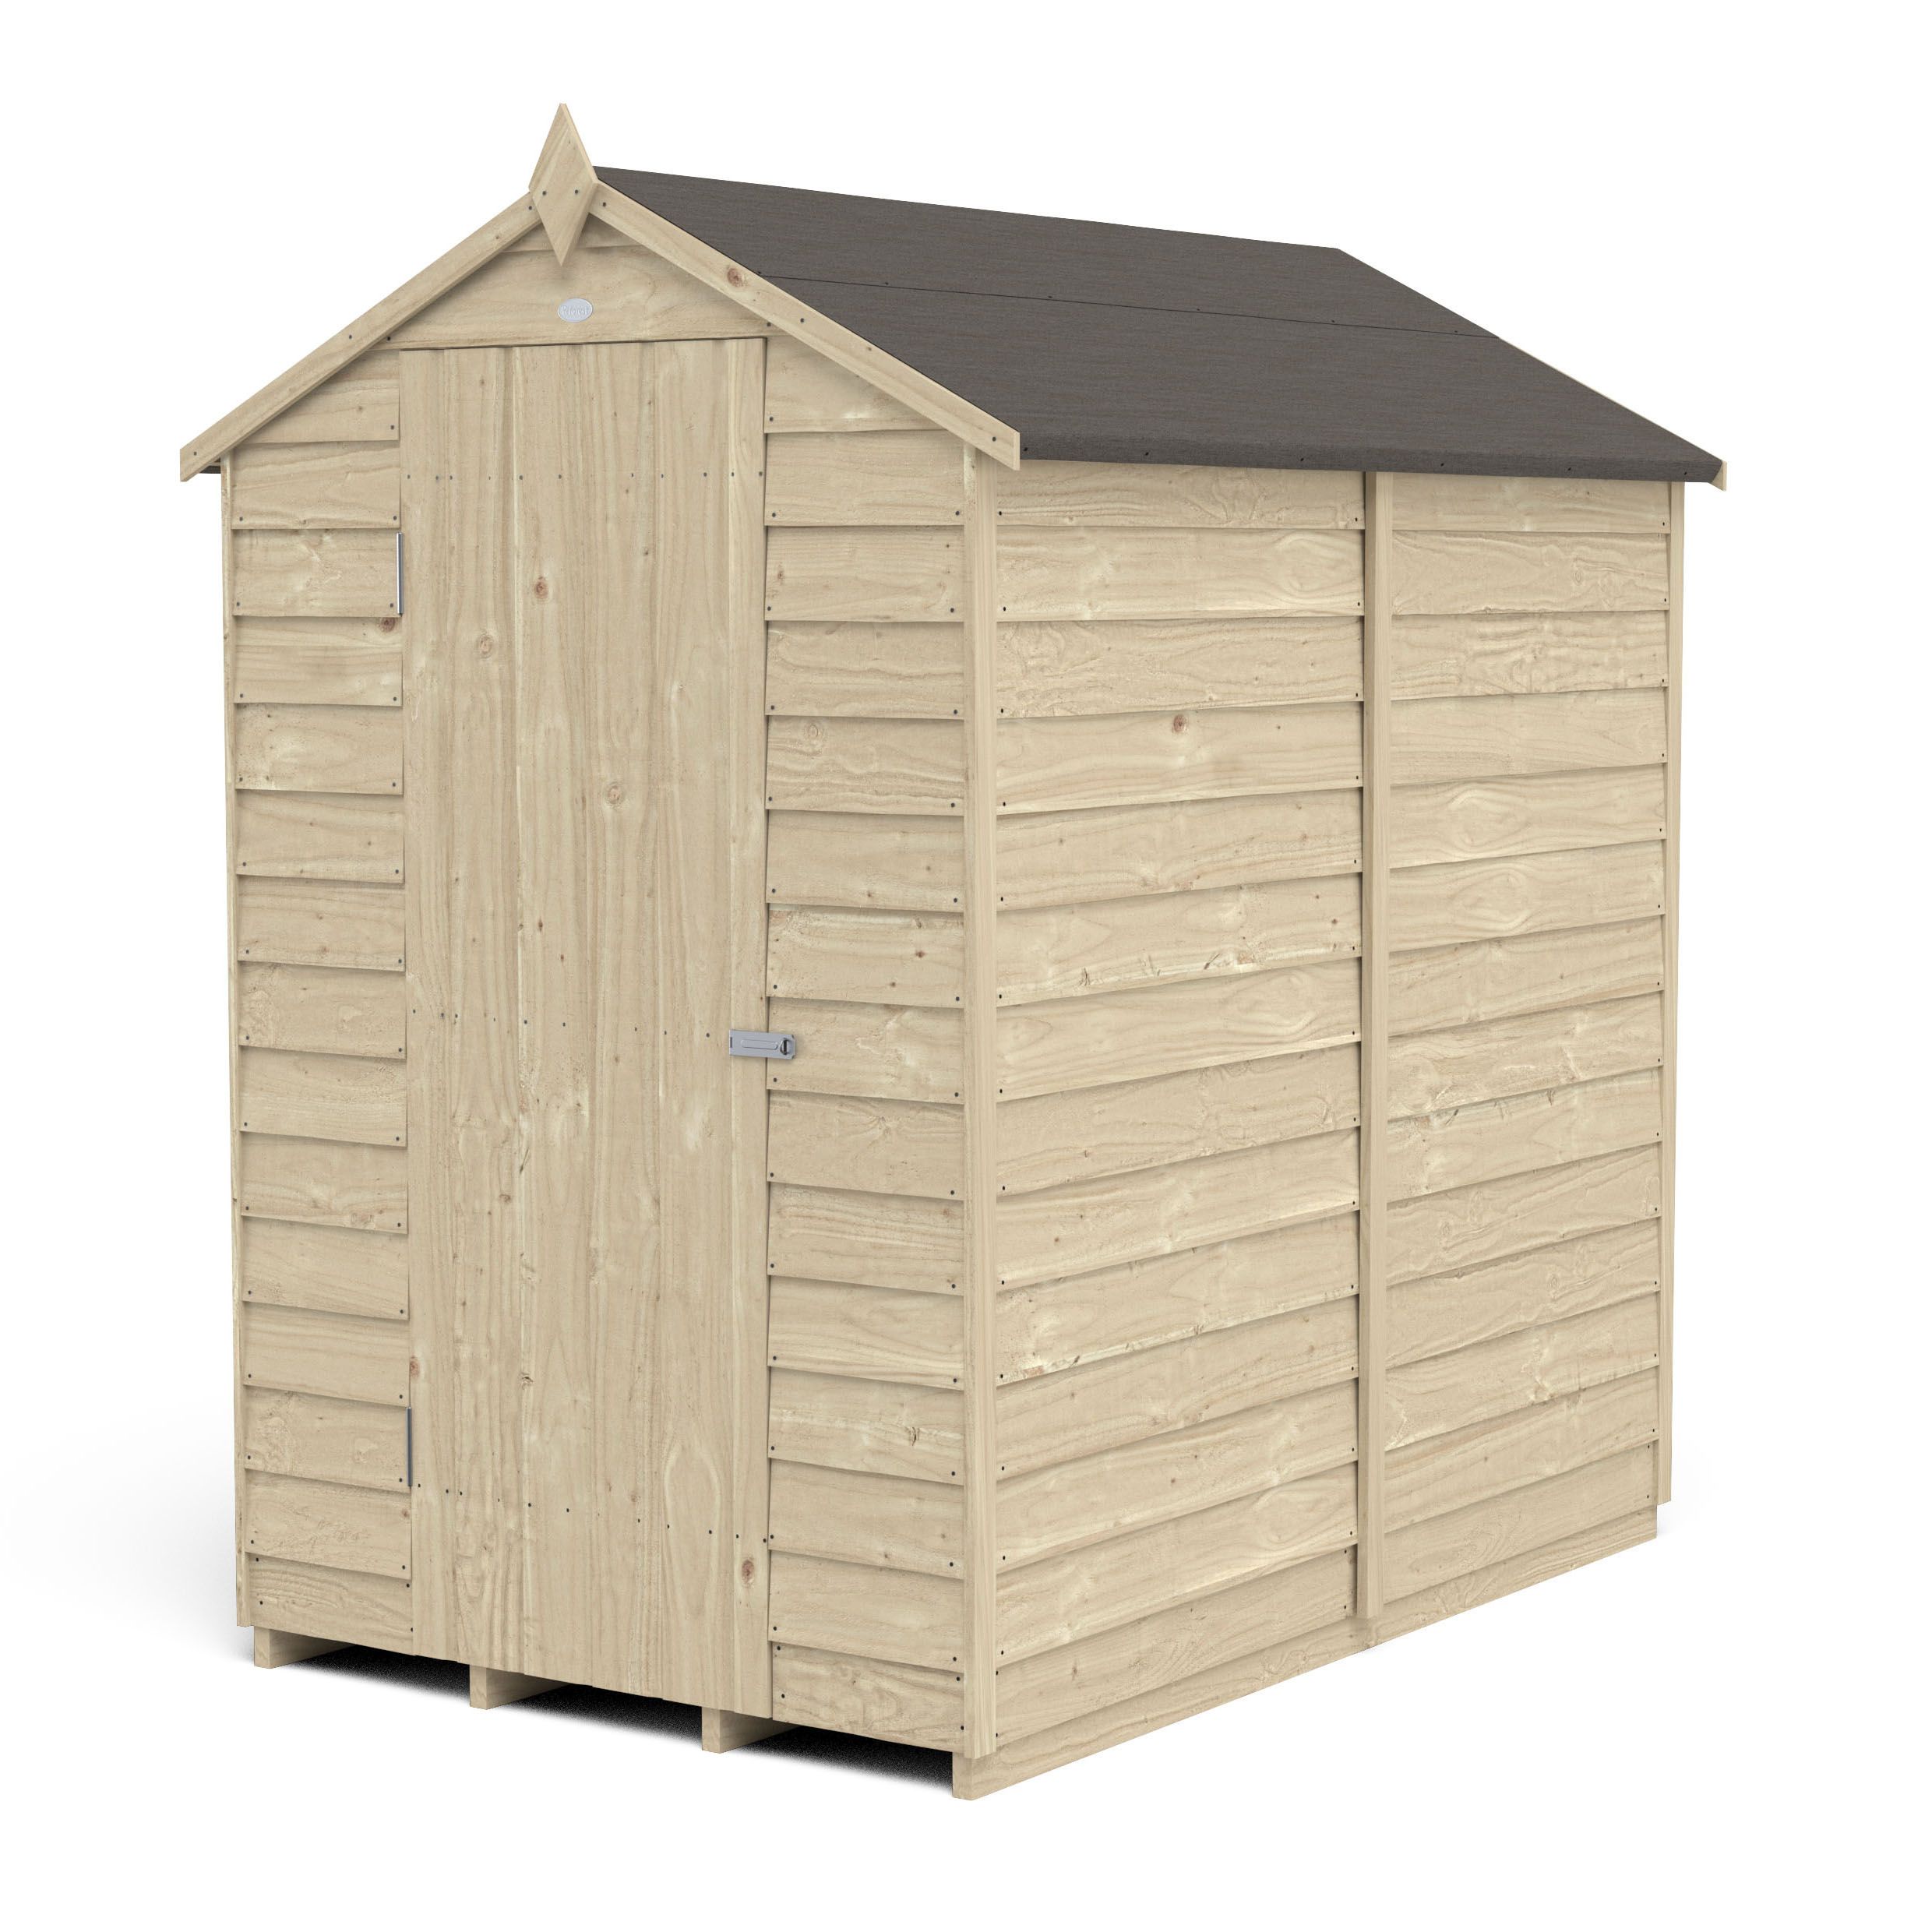 Forest Garden Overlap 6x4 ft Apex Wooden Pressure treated Shed with floor (Base included) - Assembly service included